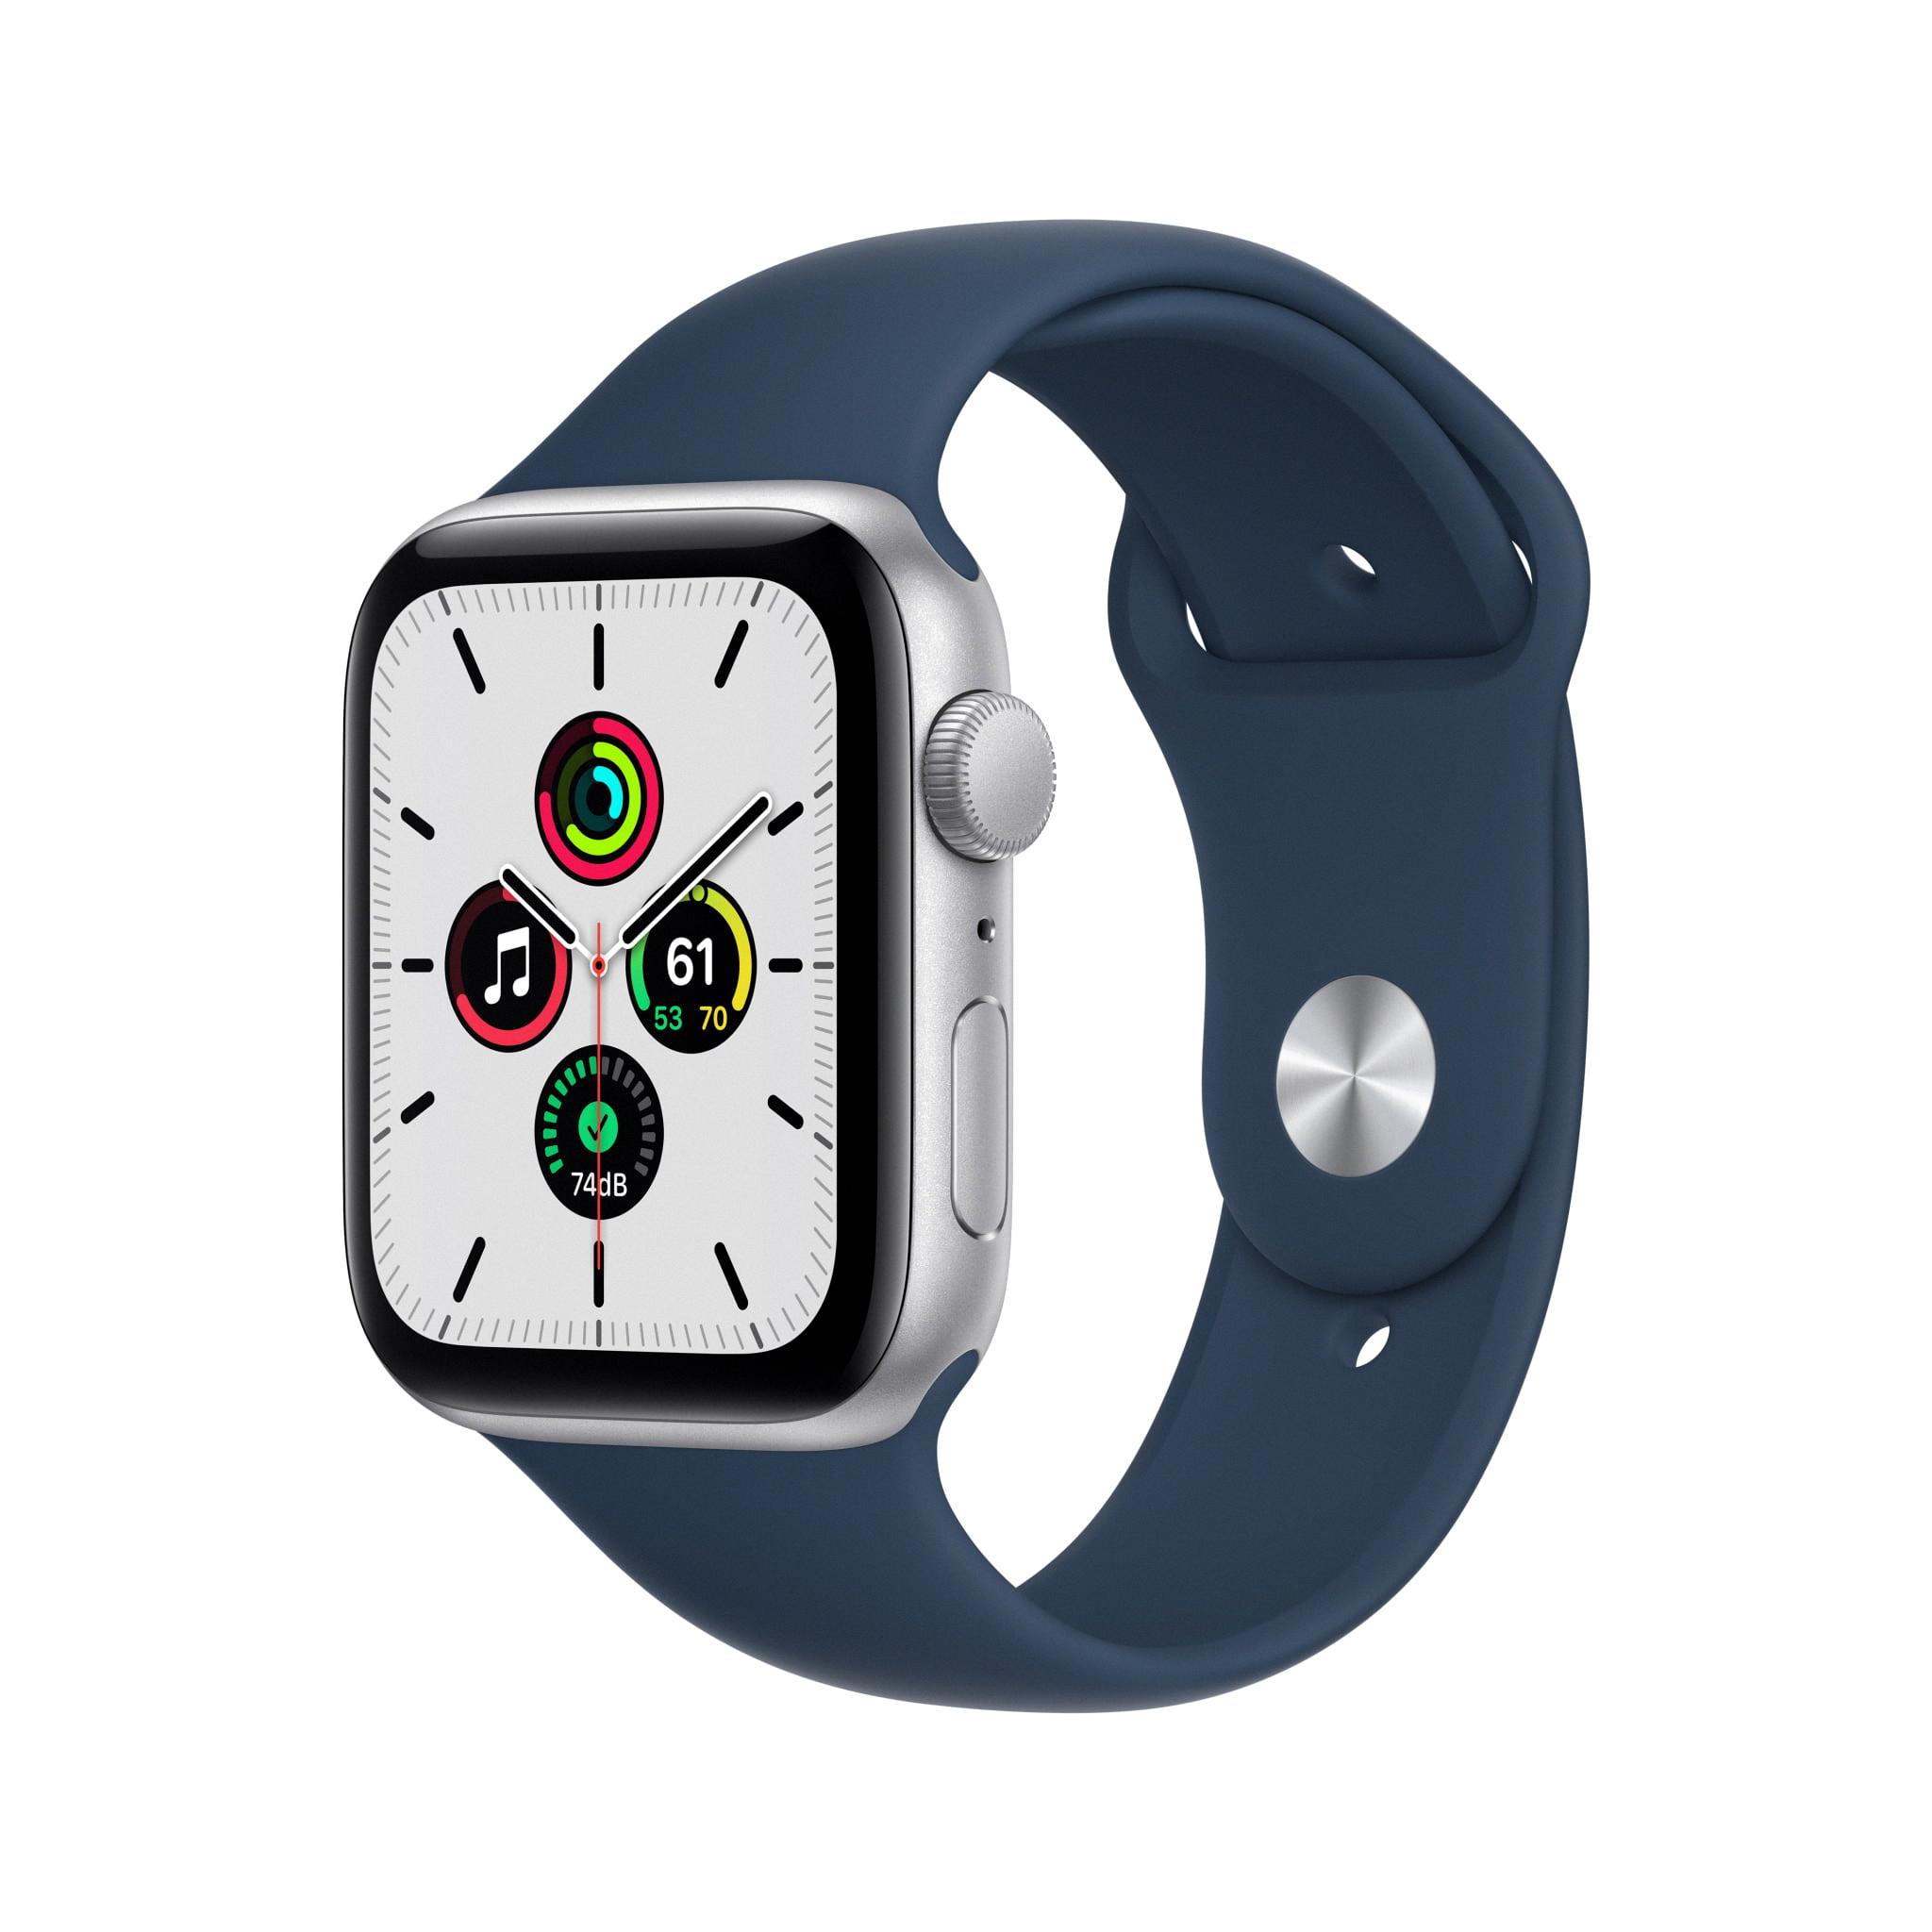 How To Stop Apple Watch From Beeping 3